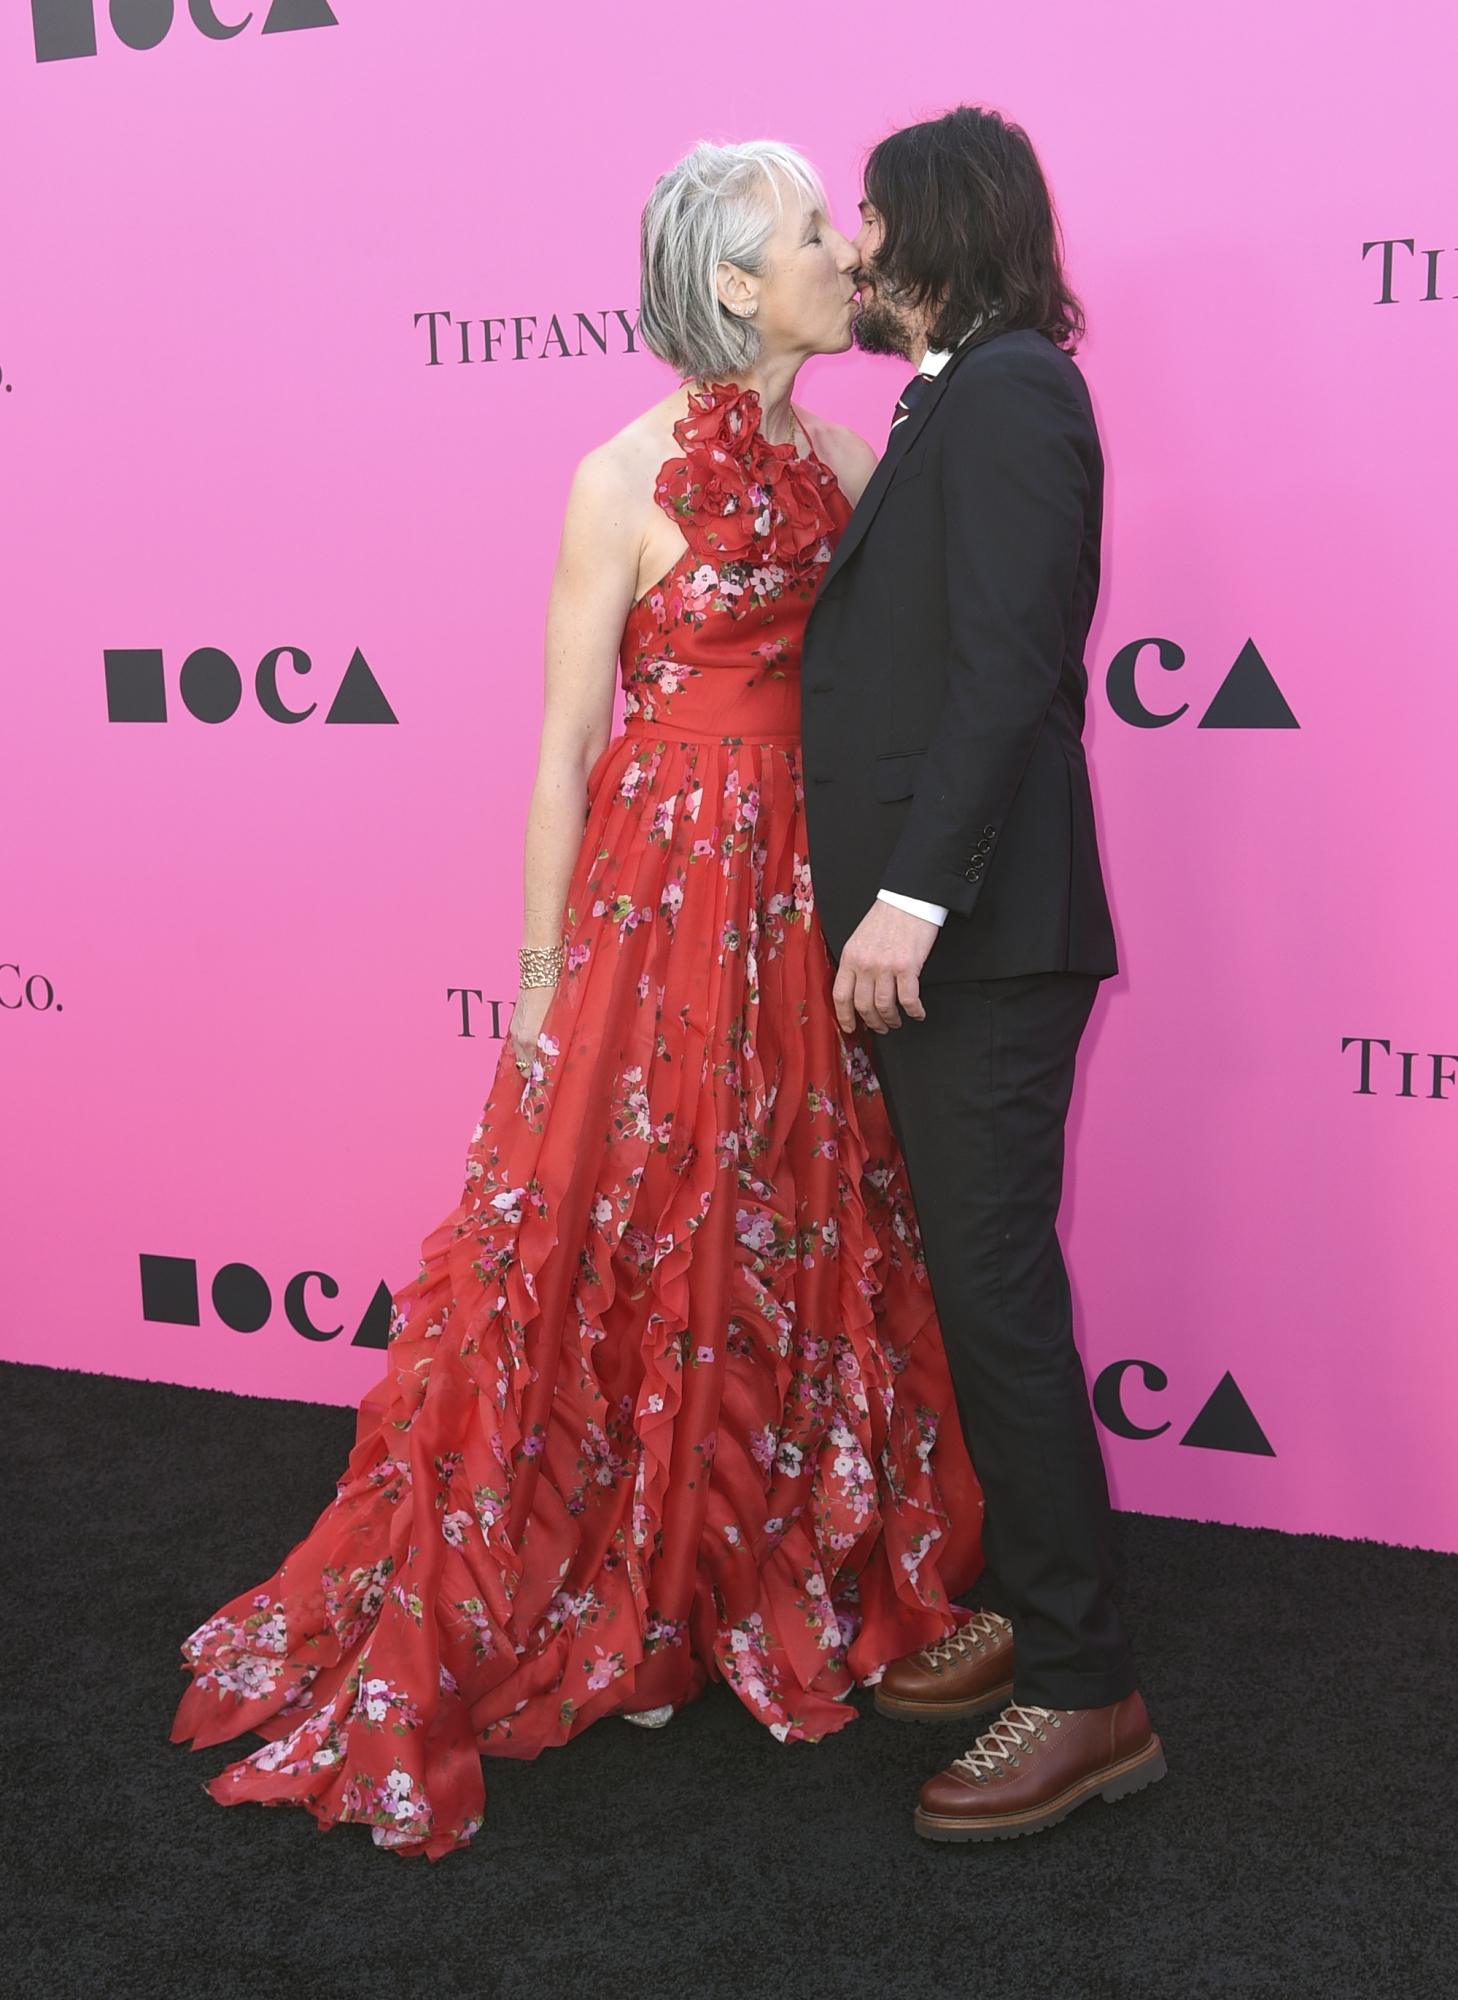 Alexandra Grant, left, and Keanu Reeves arrive at the Museum of Contemporary Art (MOCA) Gala on Saturday, April 15, 2023, in Los Angeles. (Photo by Richard Shotwell/Invision/AP)